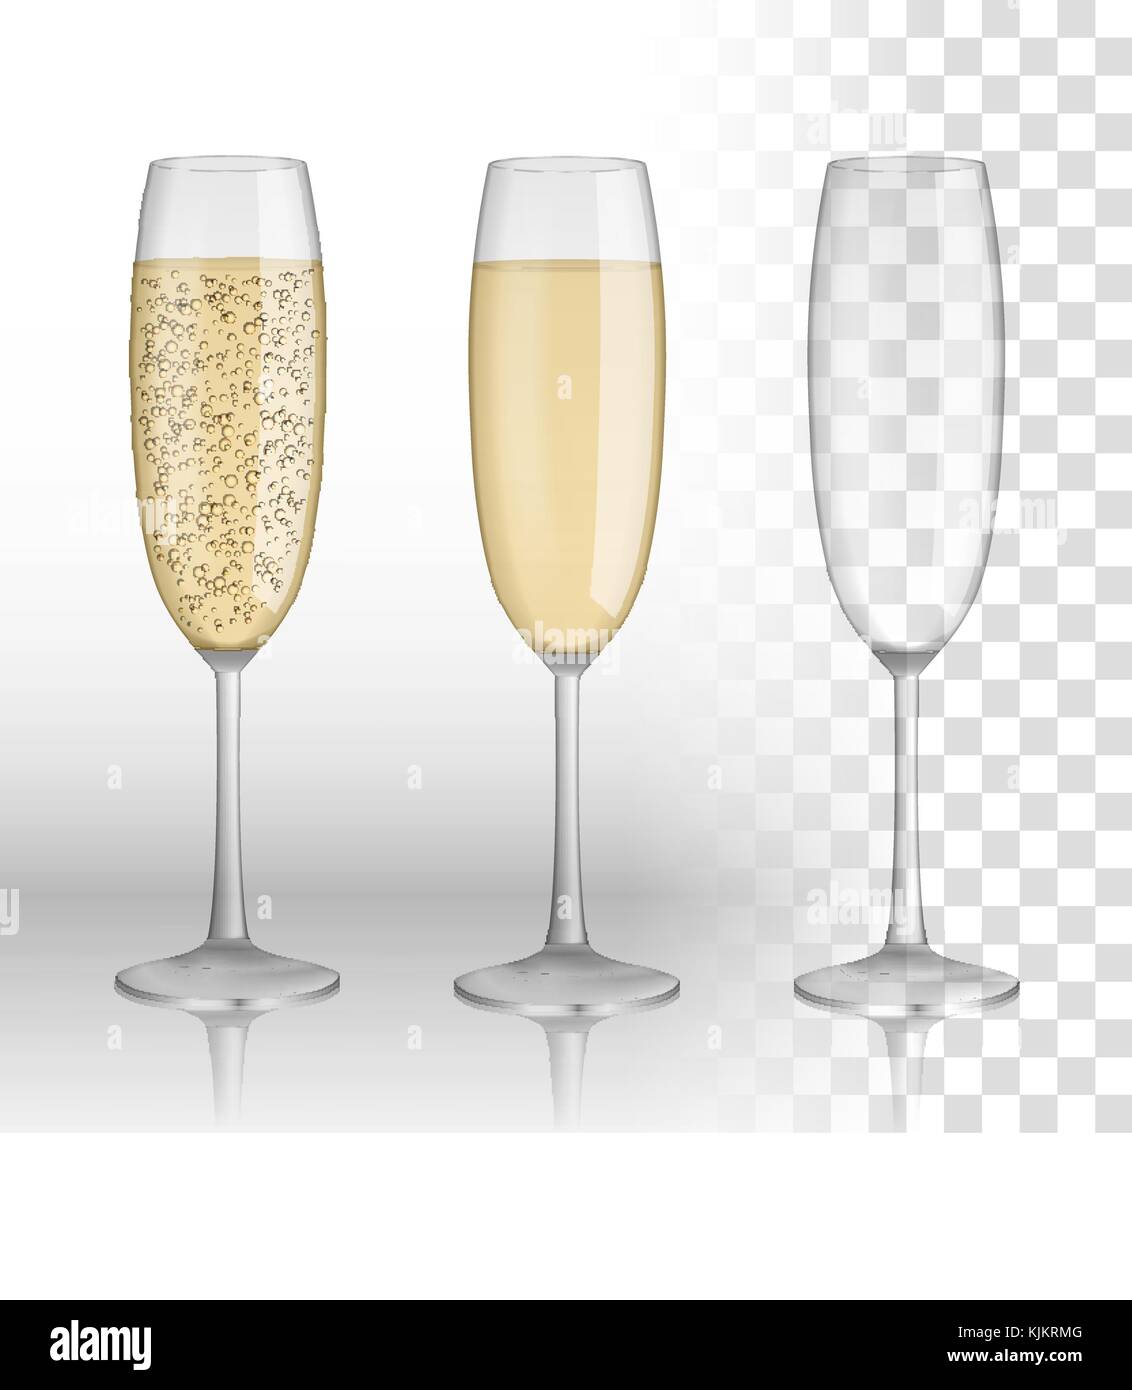 Full and empty glass of champagne and white wine isolated on a transparent background. vector glass. Holiday Merry Christmas and Happy New Year celebration concept. vector illustration Stock Vector